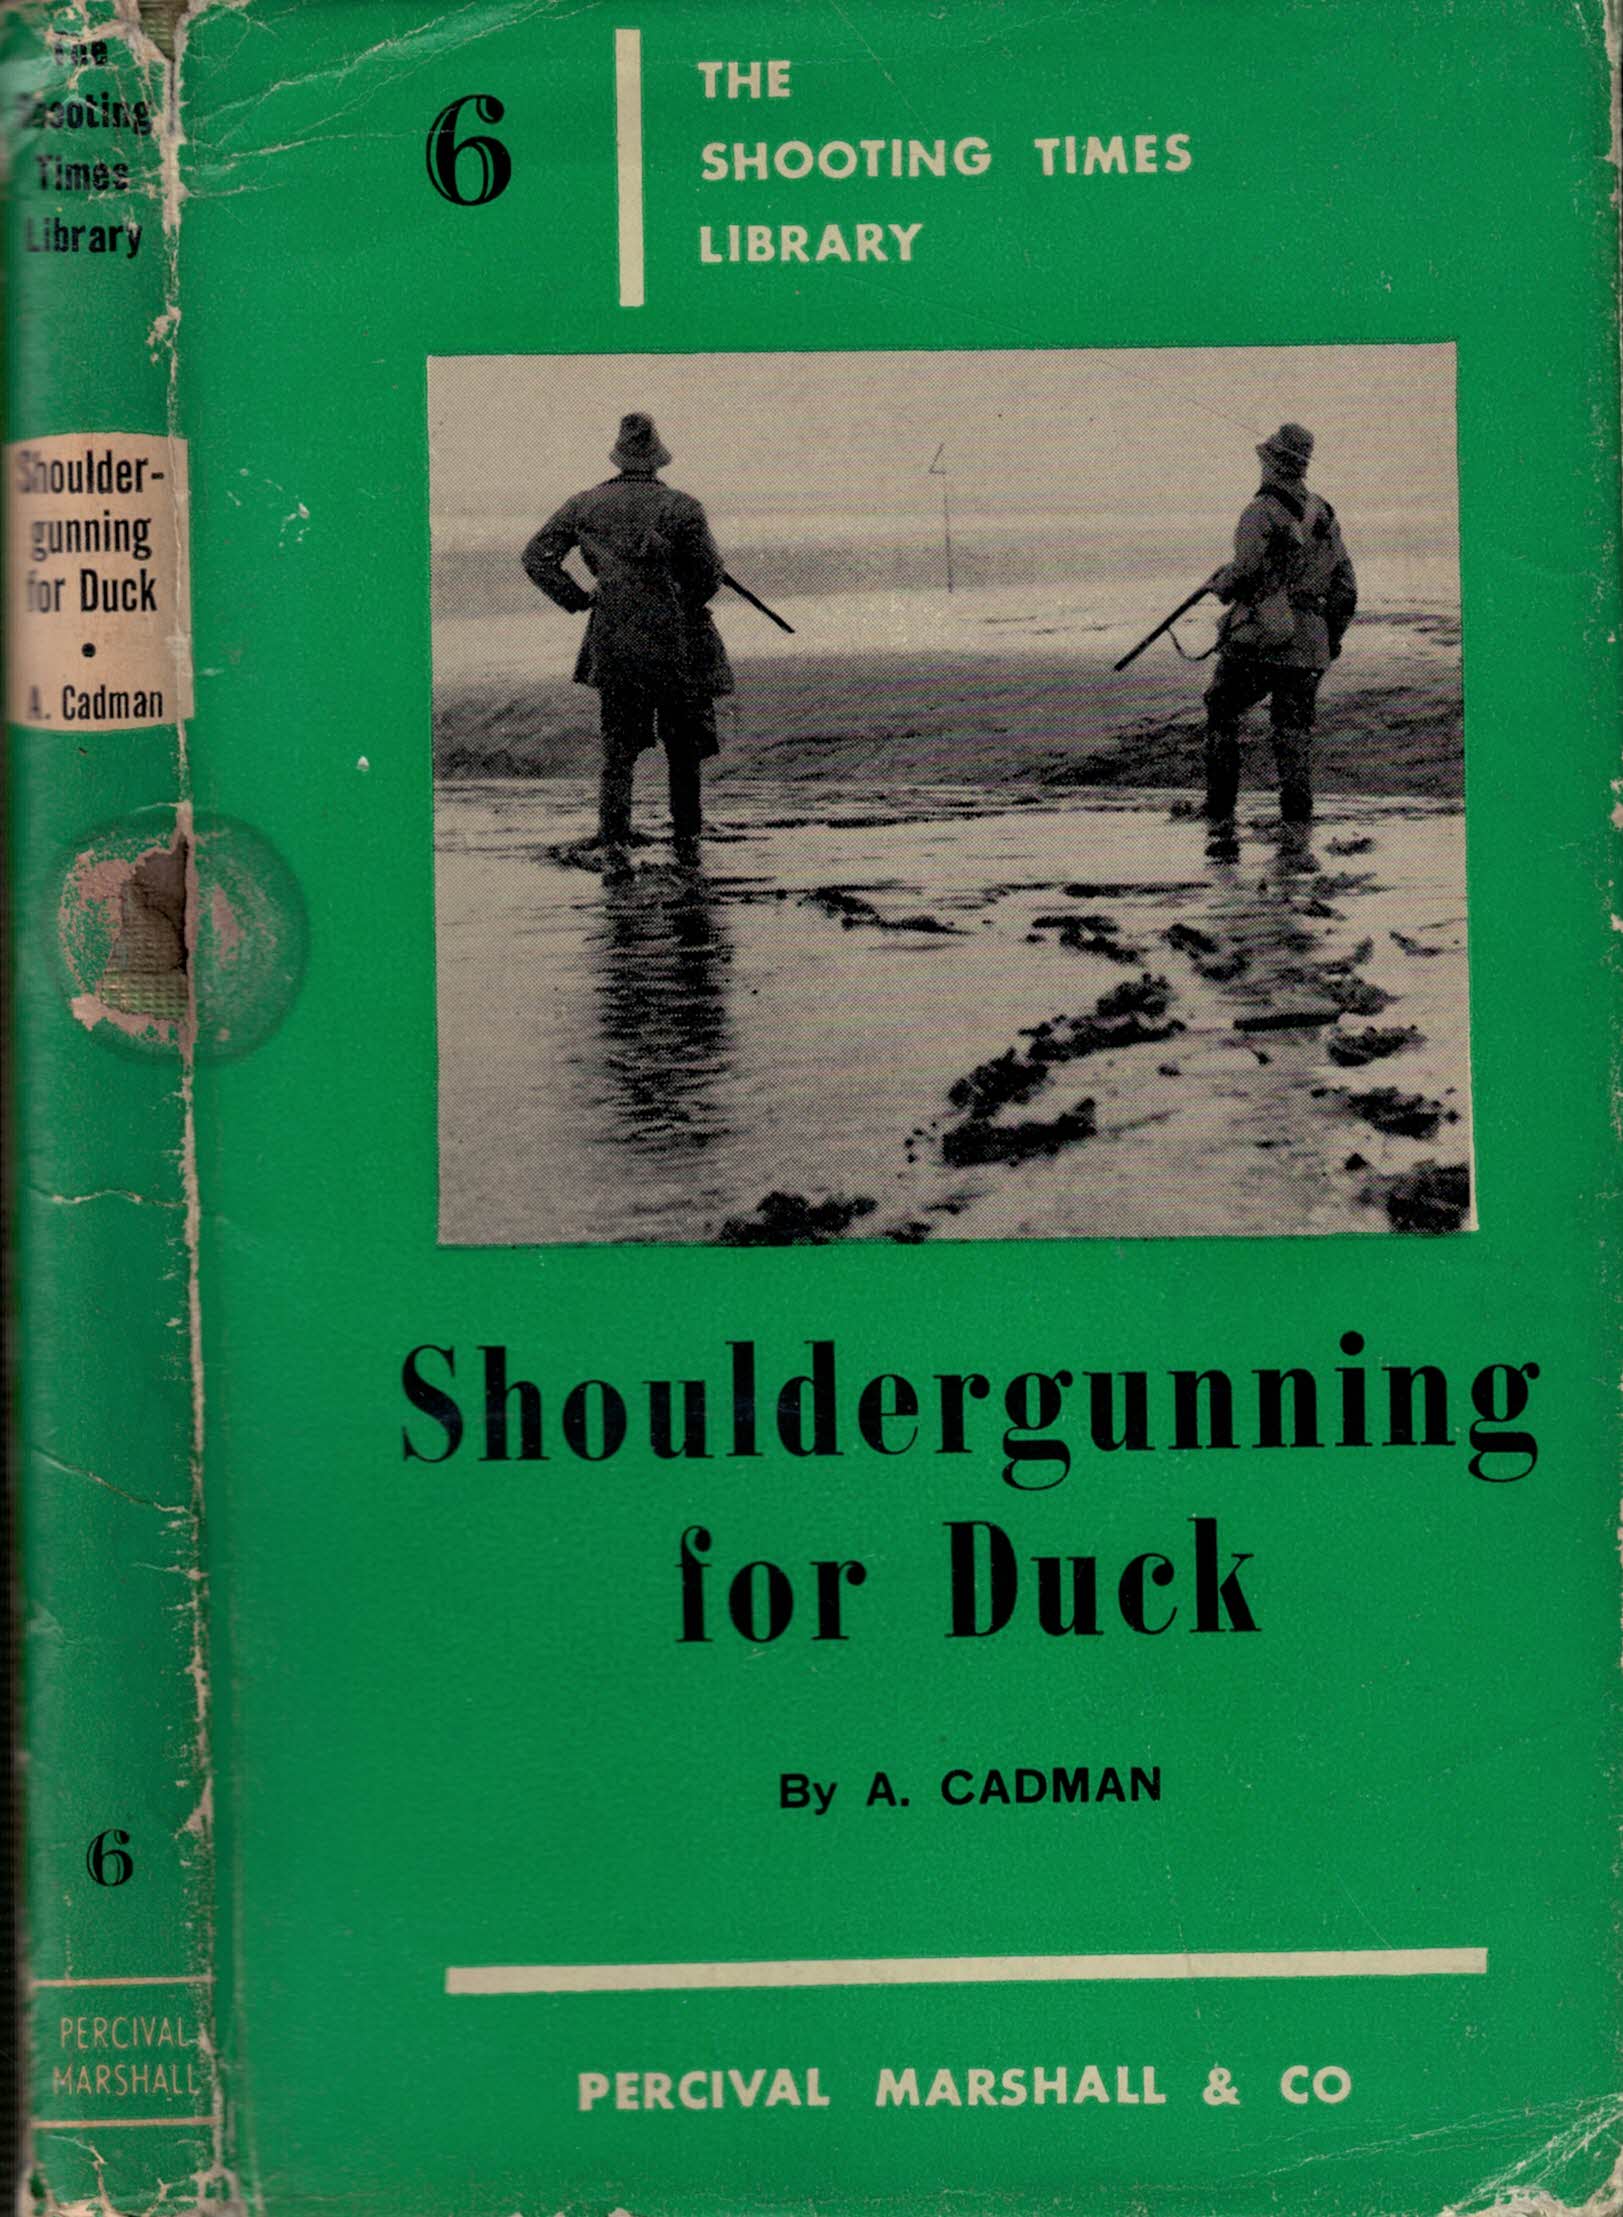 Shouldergunning for Duck. The Shooting Times Library No. 6.